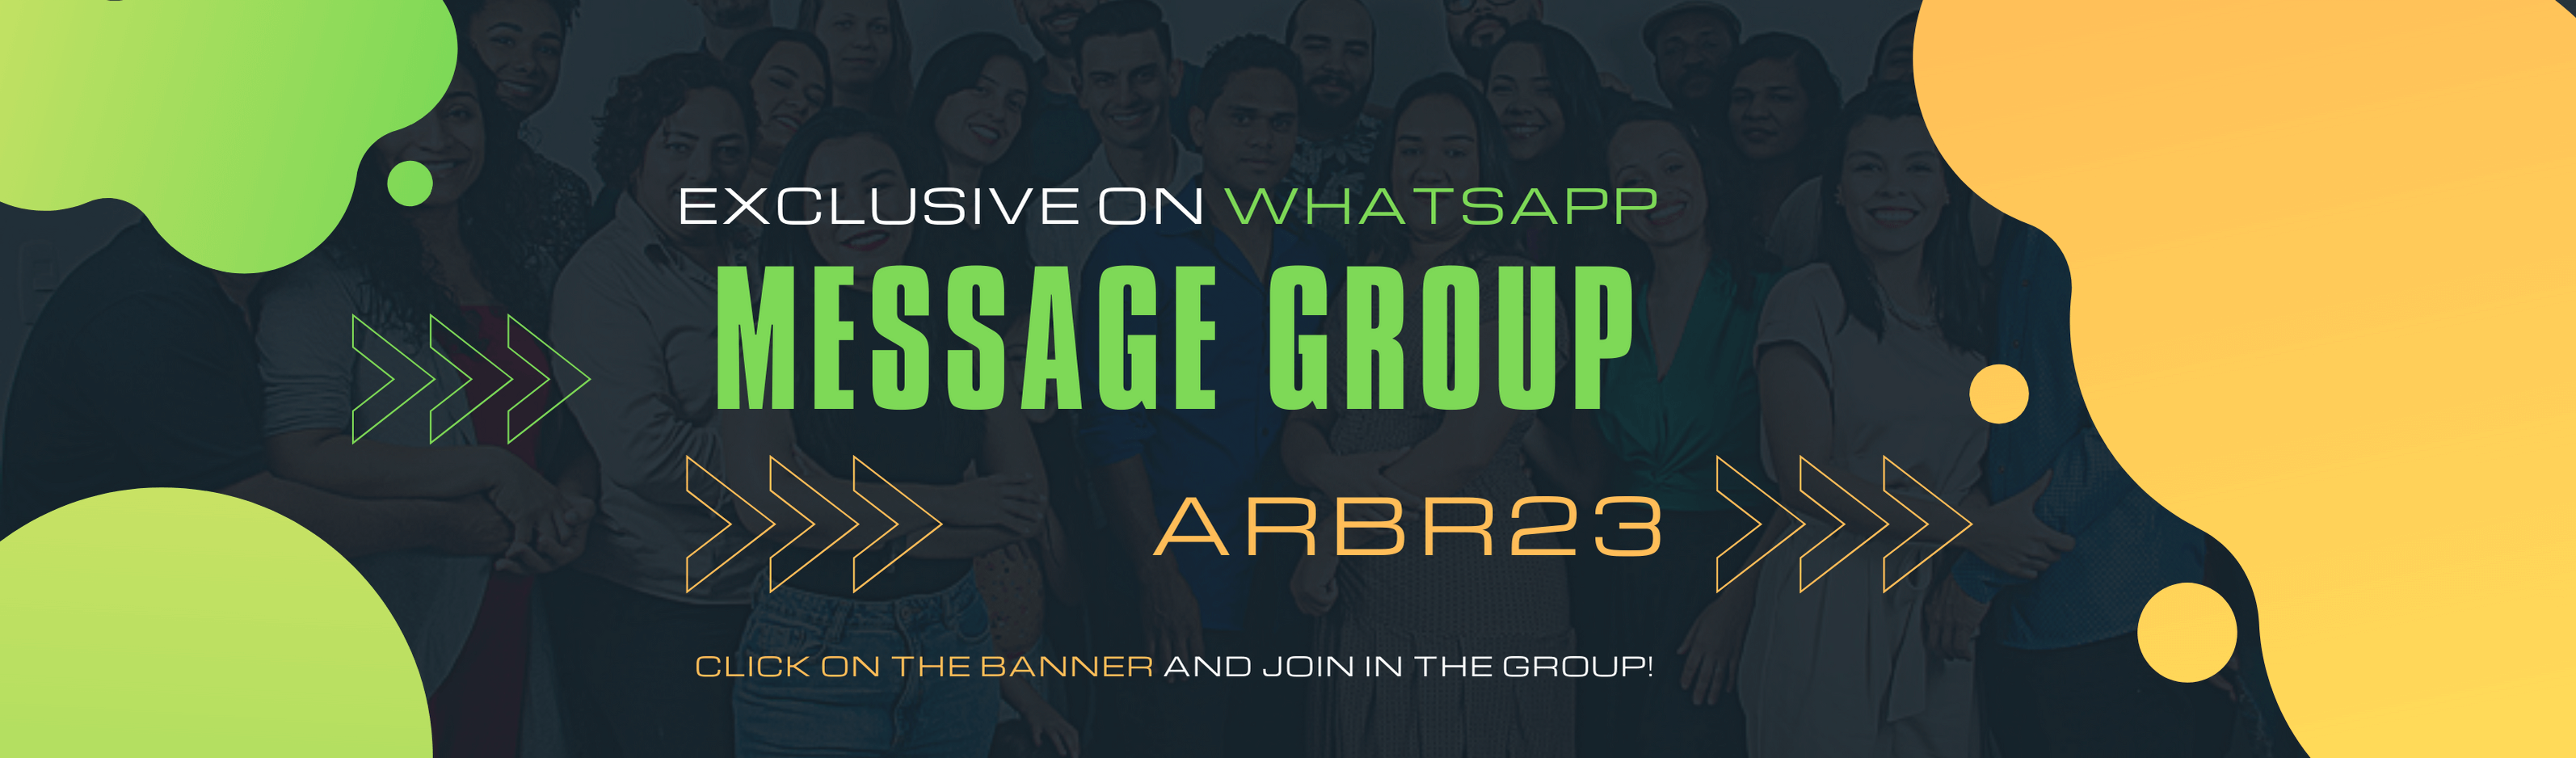 Message Group on WhatsApp ARBR23